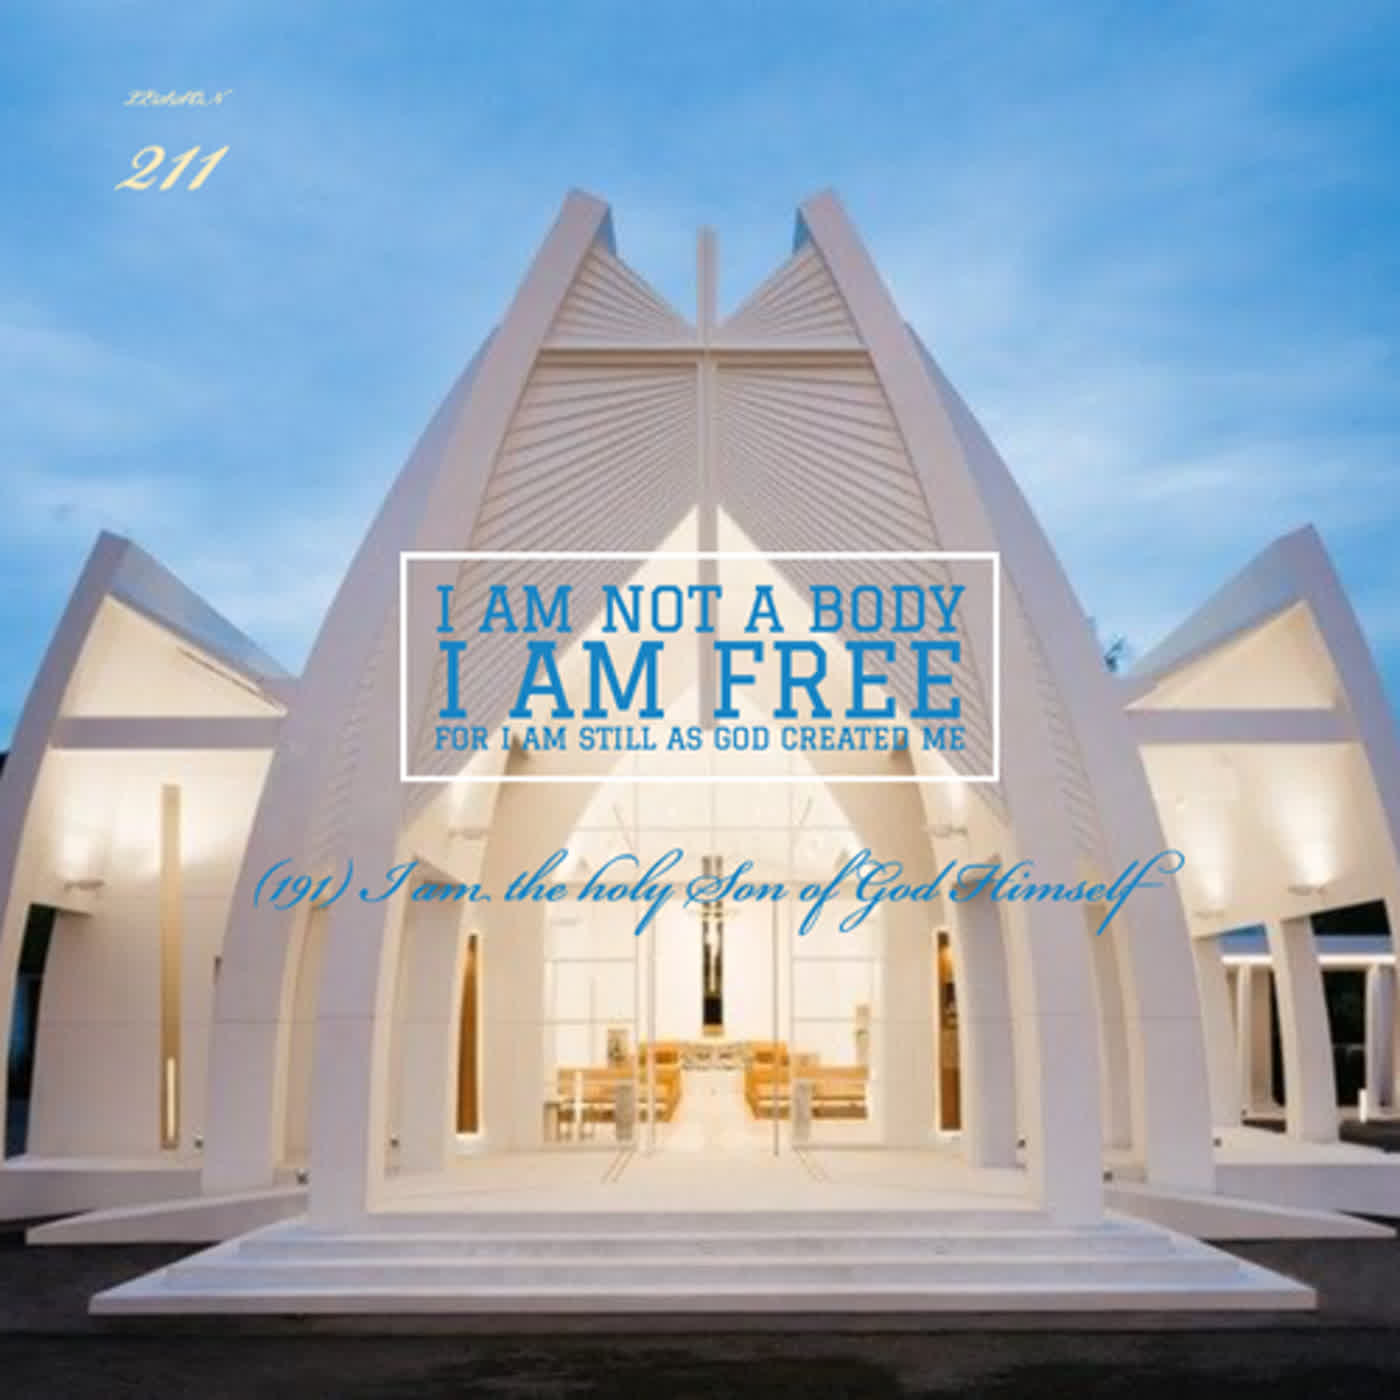 Lesson 211  I am not a body. I am free.  For I am still as God created me